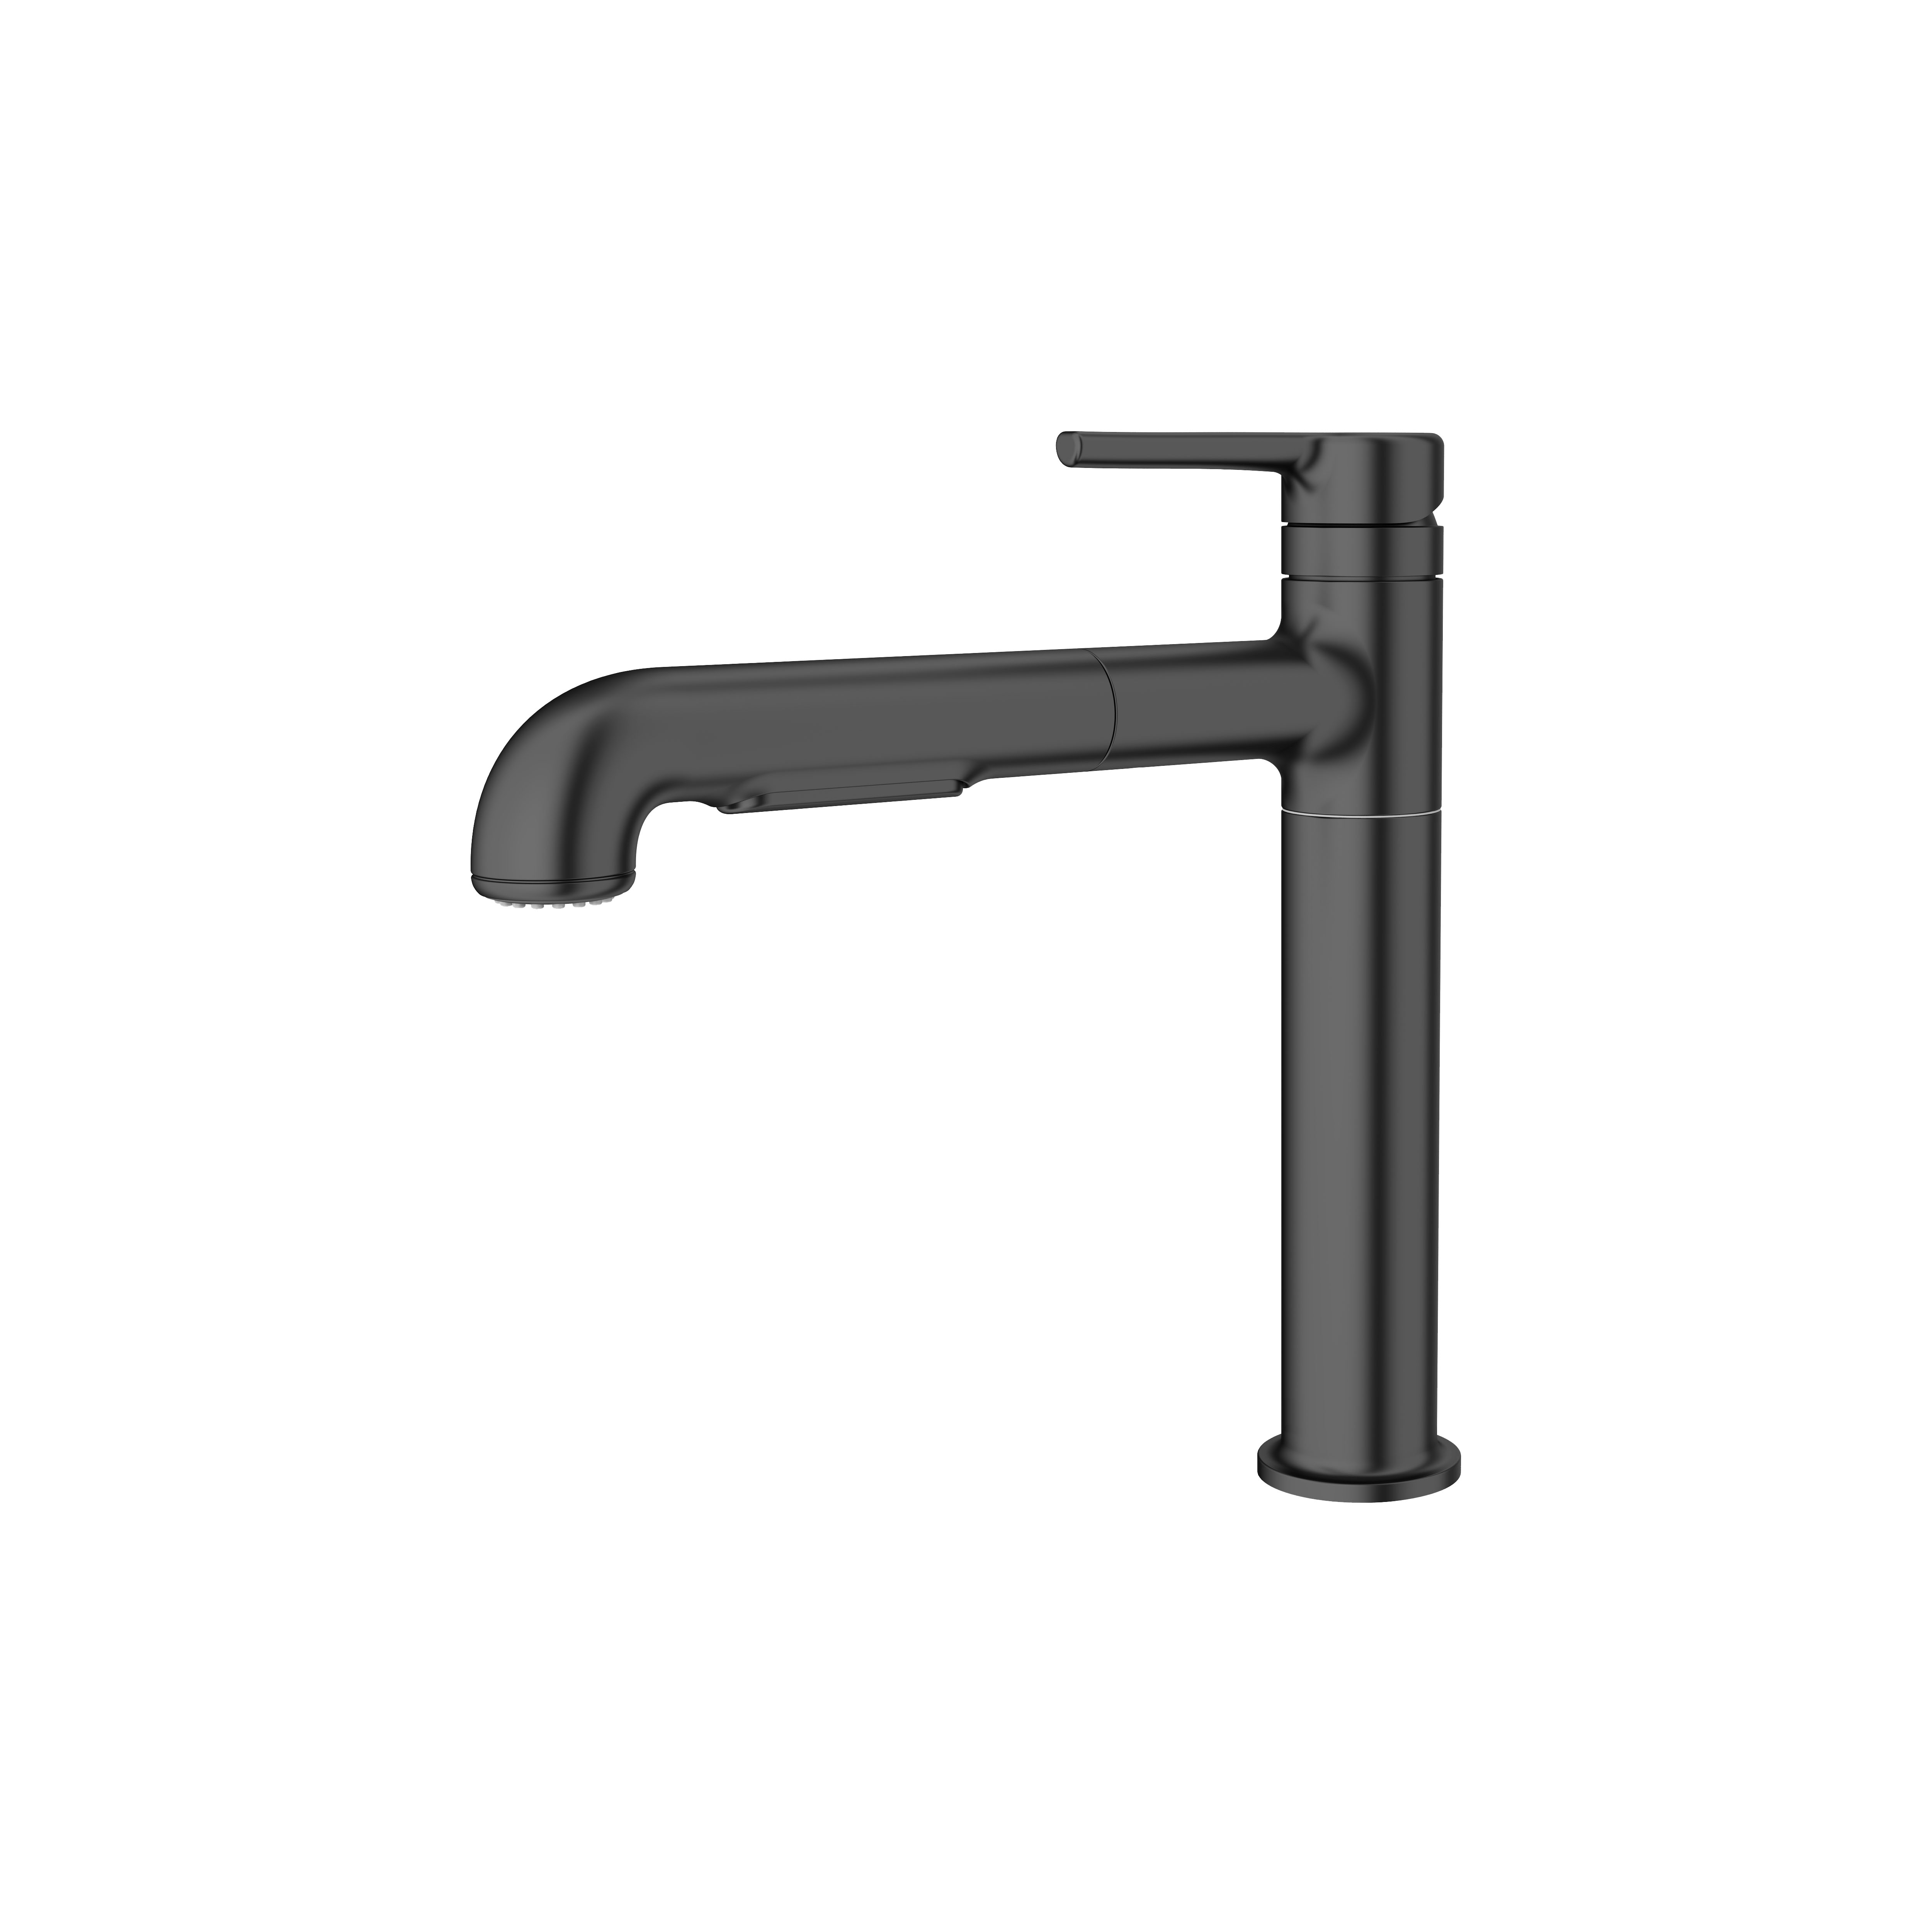 Studio® S Pull-Out Dual Spray Kitchen Faucet